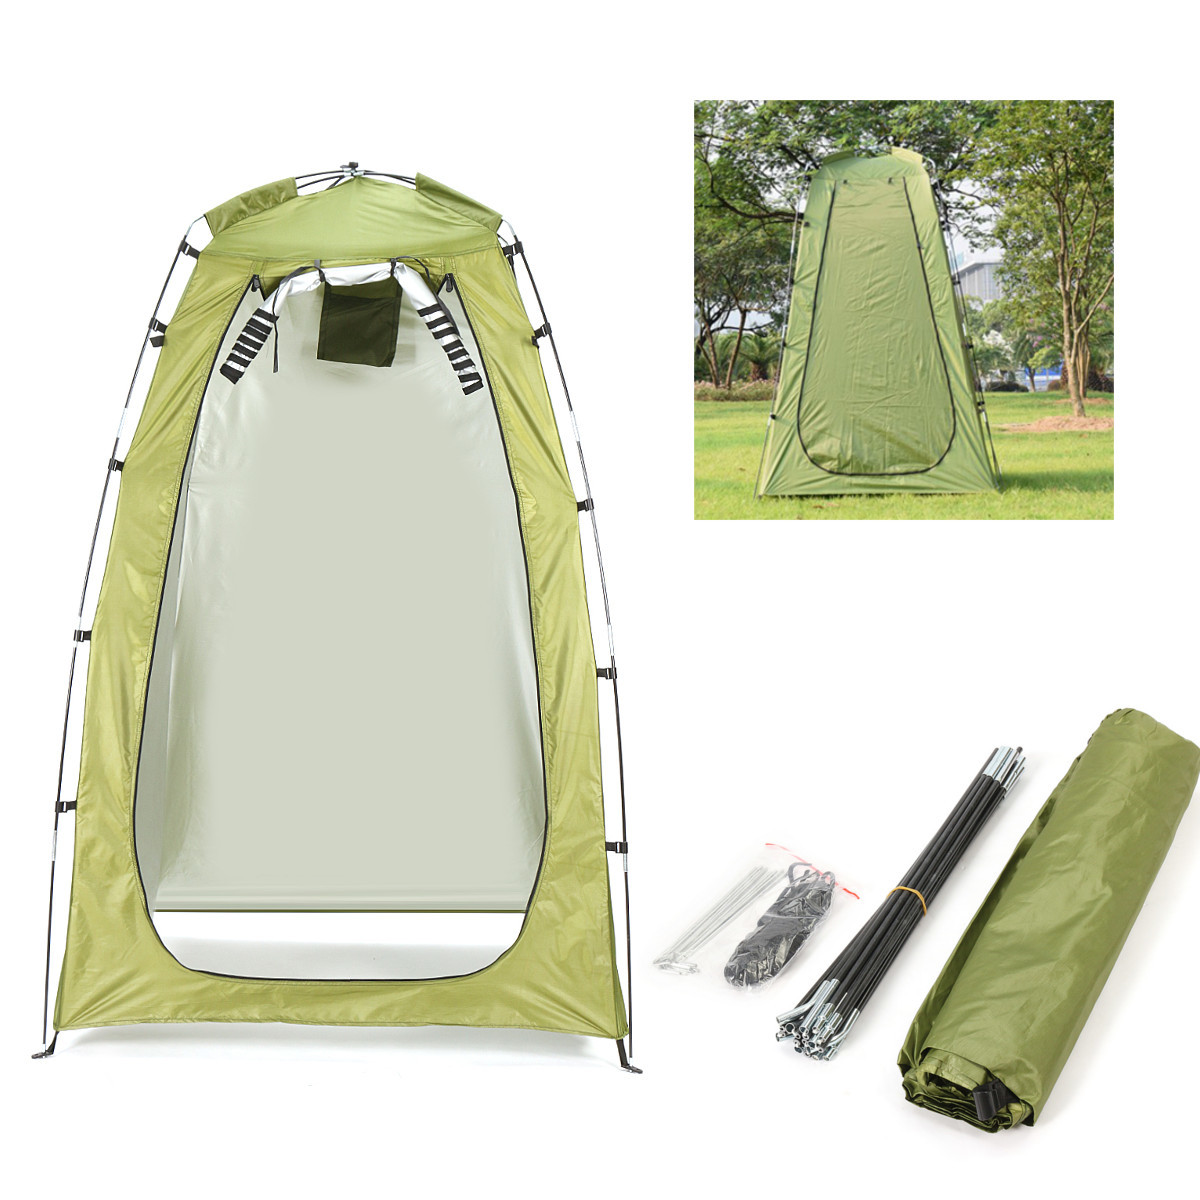 Outdoor Portable Fishing Tent Camping Shower Bathroom Toilet Changing Room 2